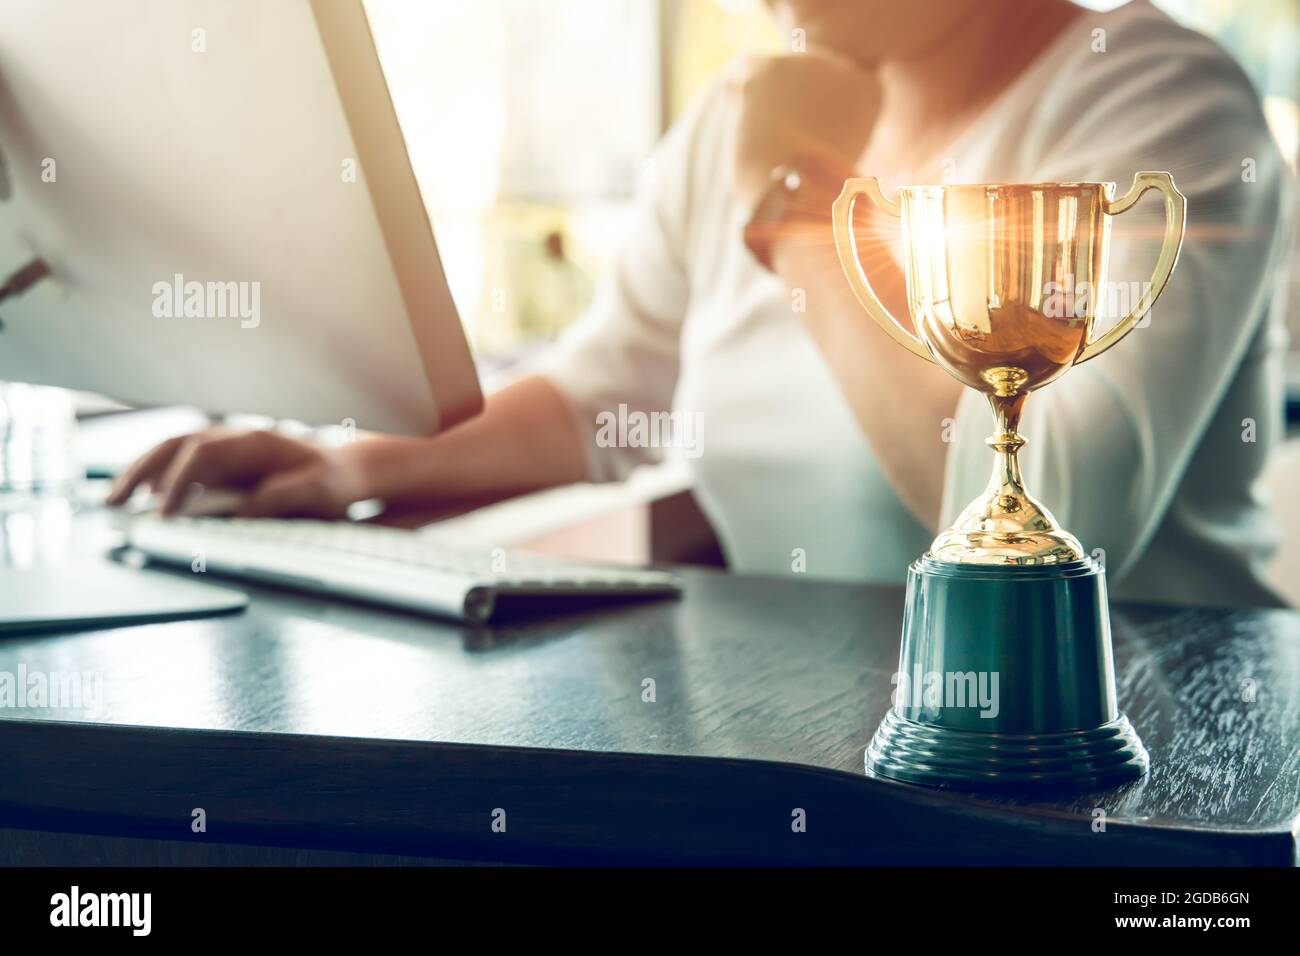 Business people working reward with golden trophy cup award to winner or champion from successful for business hard work concept. Stock Photo